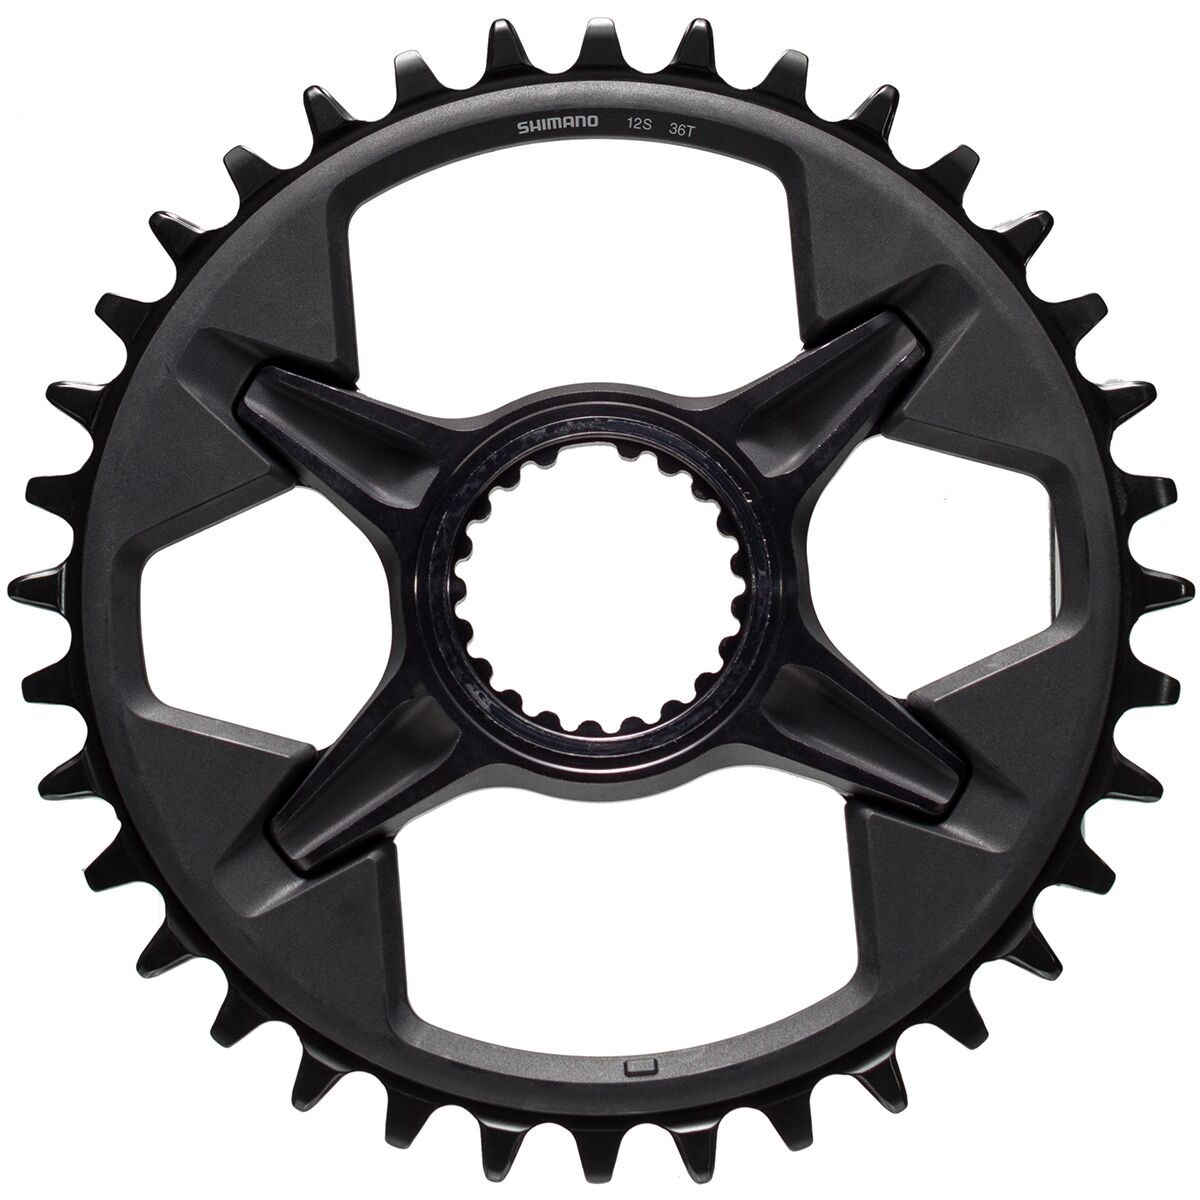 Direct-Mount Chainring - Components